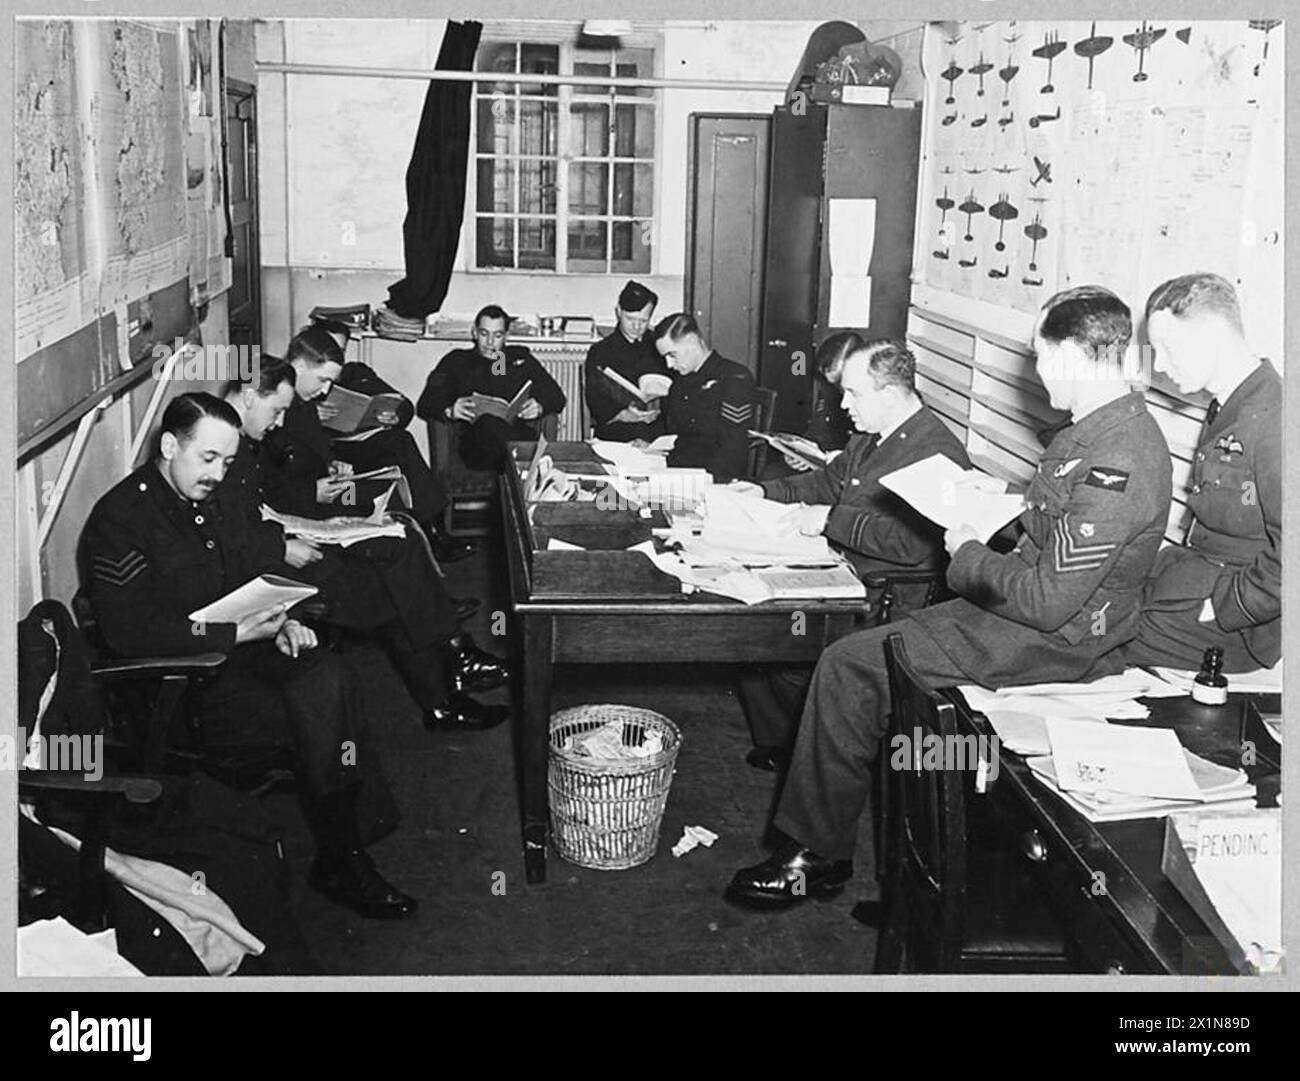 DEFEATING GERMANY'S KEY WEAPON : LIBERATOR v. U-BOAT - 9576 (Picture issued 1943) Members of Liberator air crews studying the shapes ans sizes of enemy ships and aircraft, and methods of attack and defence, during off-duty hours, Royal Air Force Stock Photo